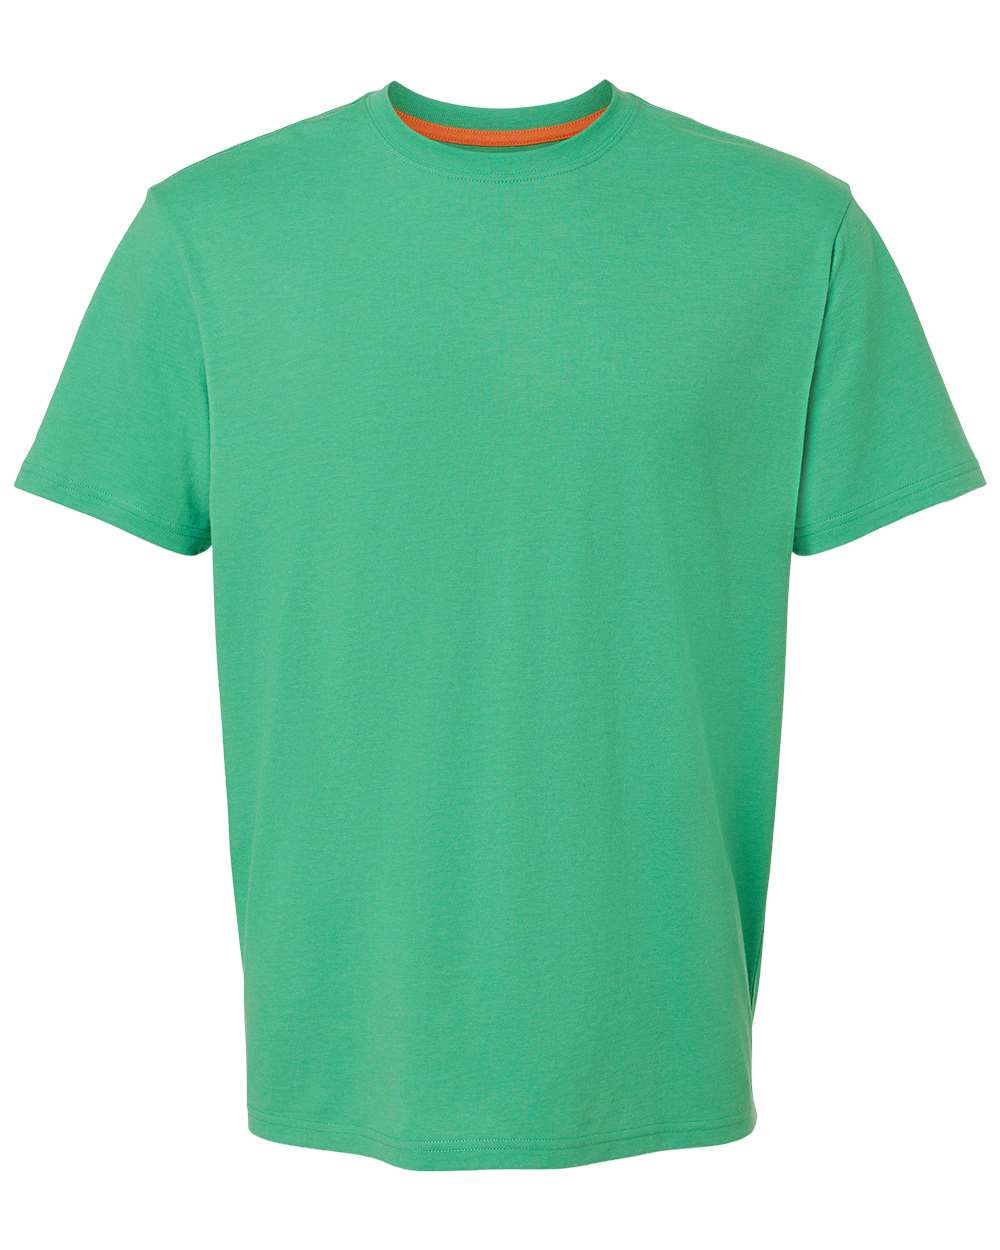 Customizable kastlfel recycledsoft t-shirt in green